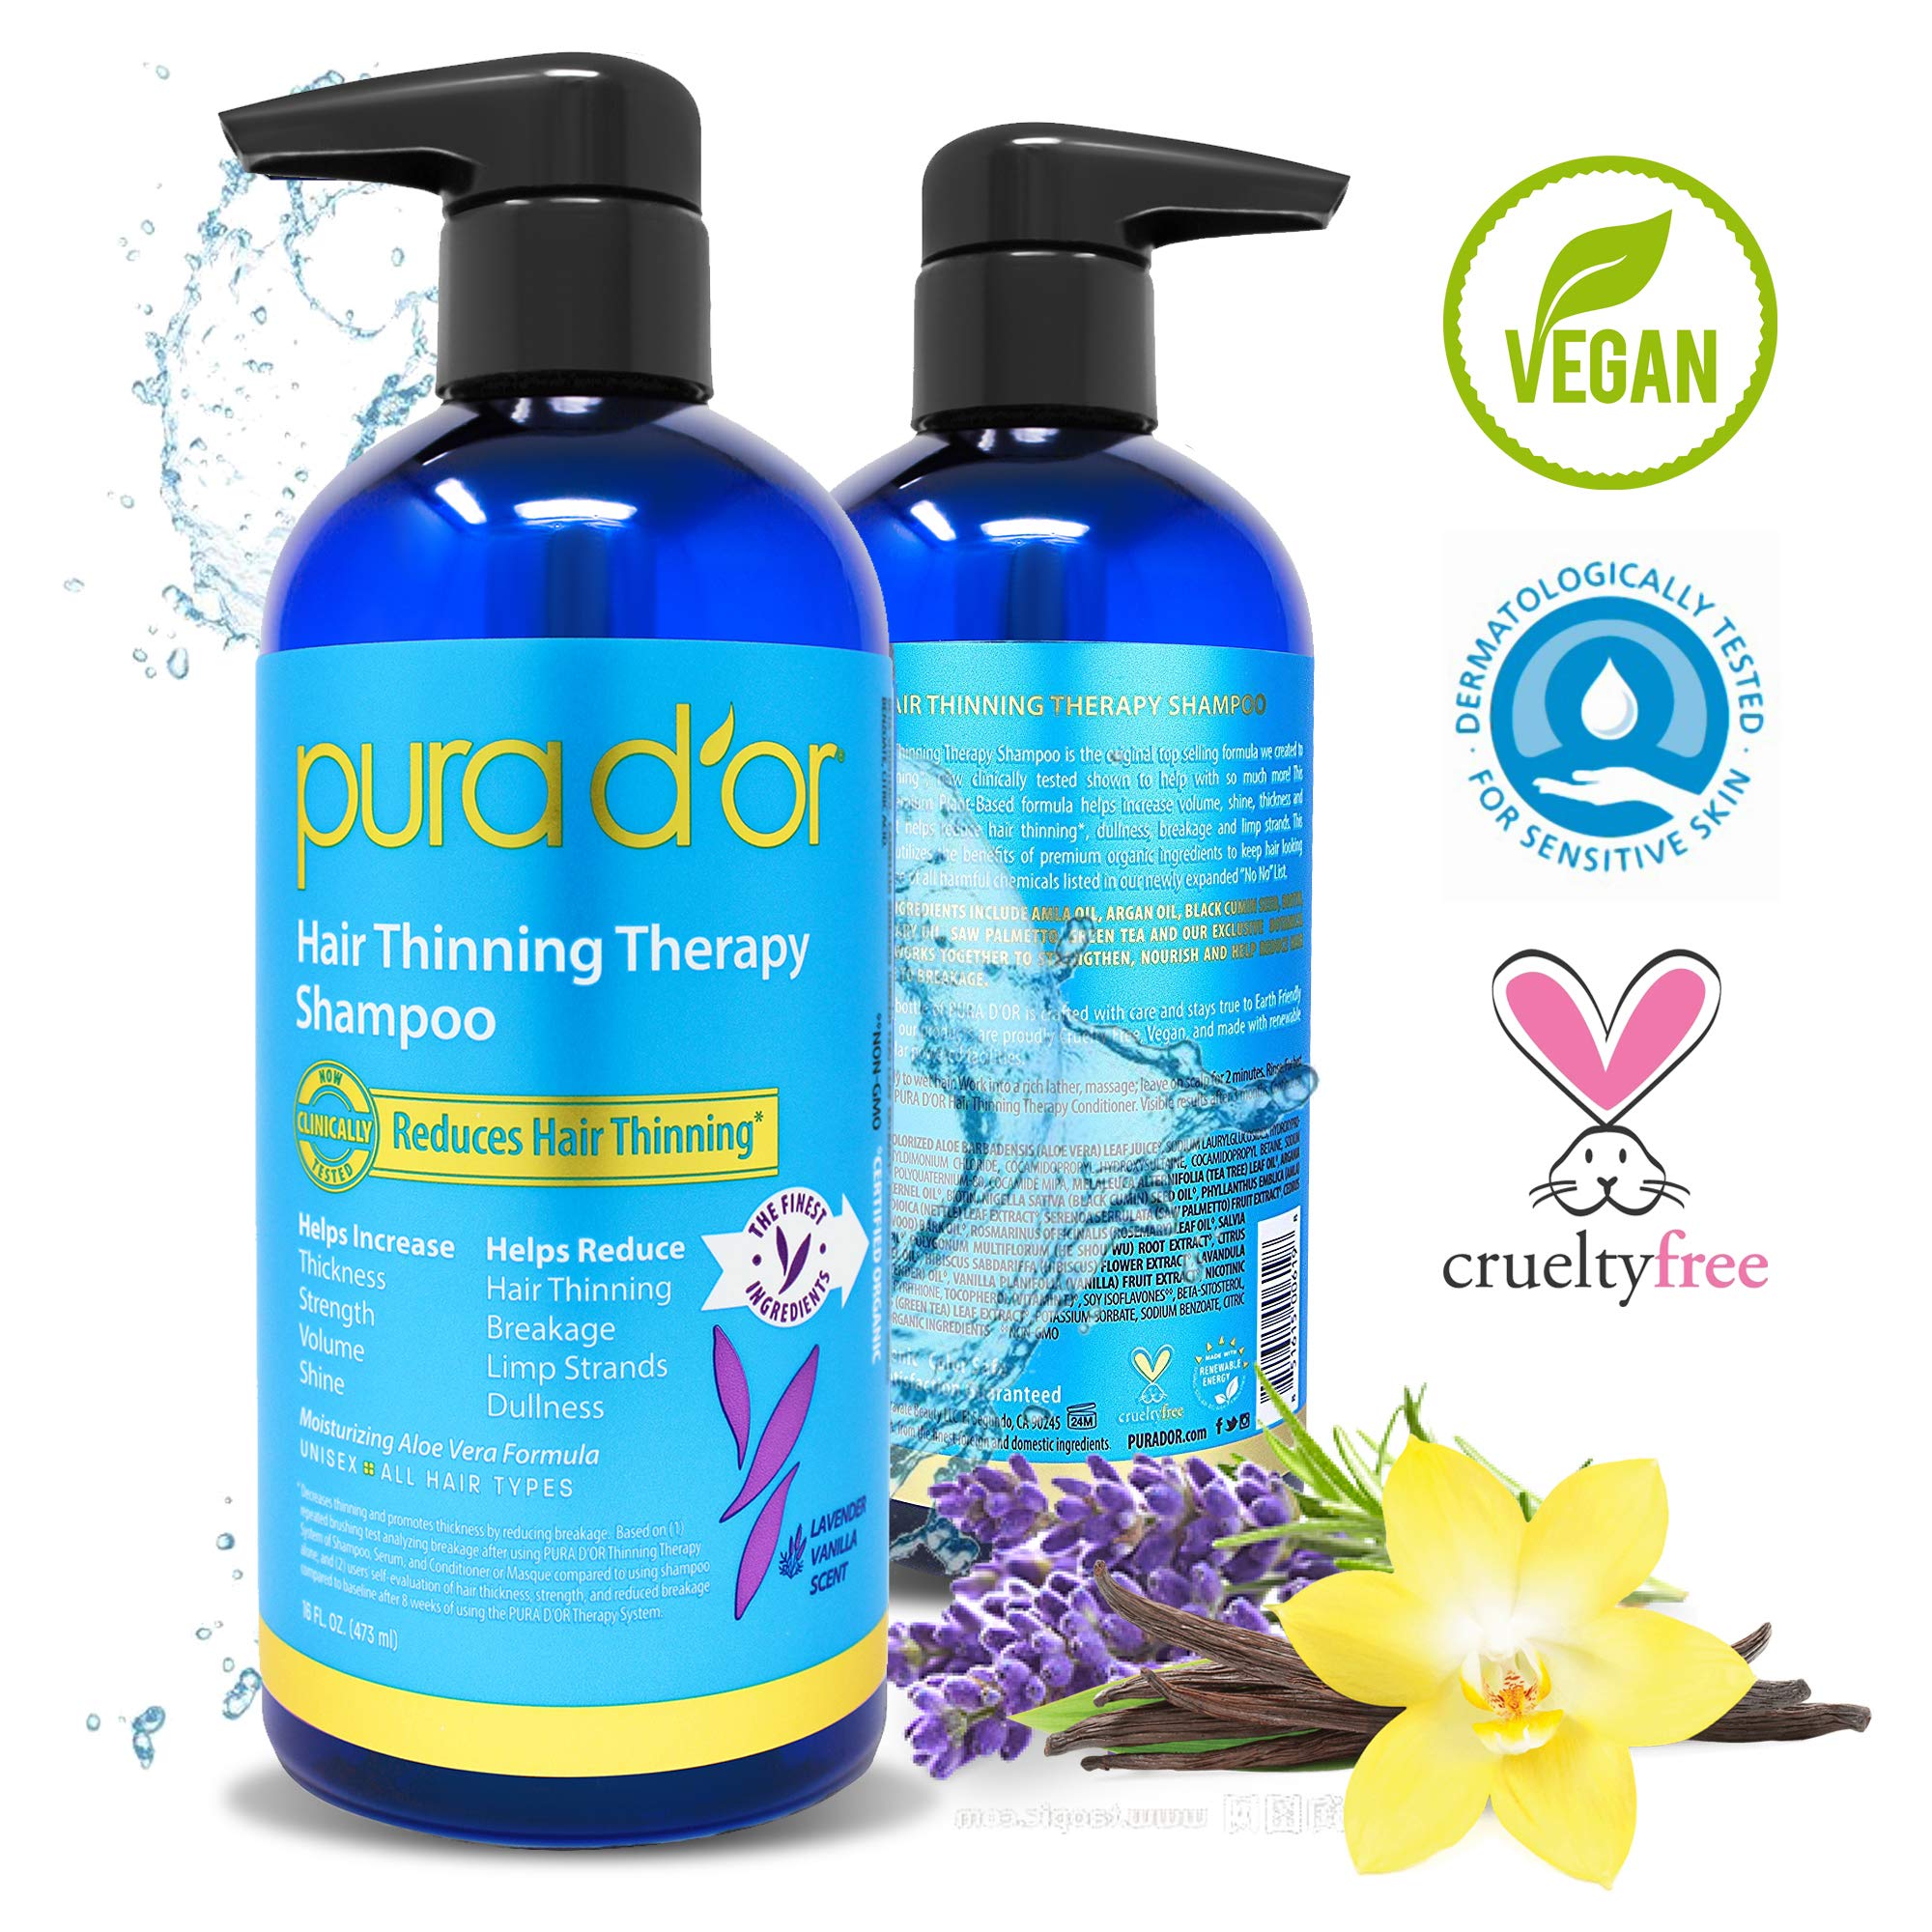 PURA D'OR 16 Oz Hair Thinning Therapy Biotin Shampoo LAVENDER VANILLA Scent - CLINICALLY TESTED Proven Results, Herbal DHT Blocker Hair Thickening Products For Women & Men, Color Safe Routine Shampoo